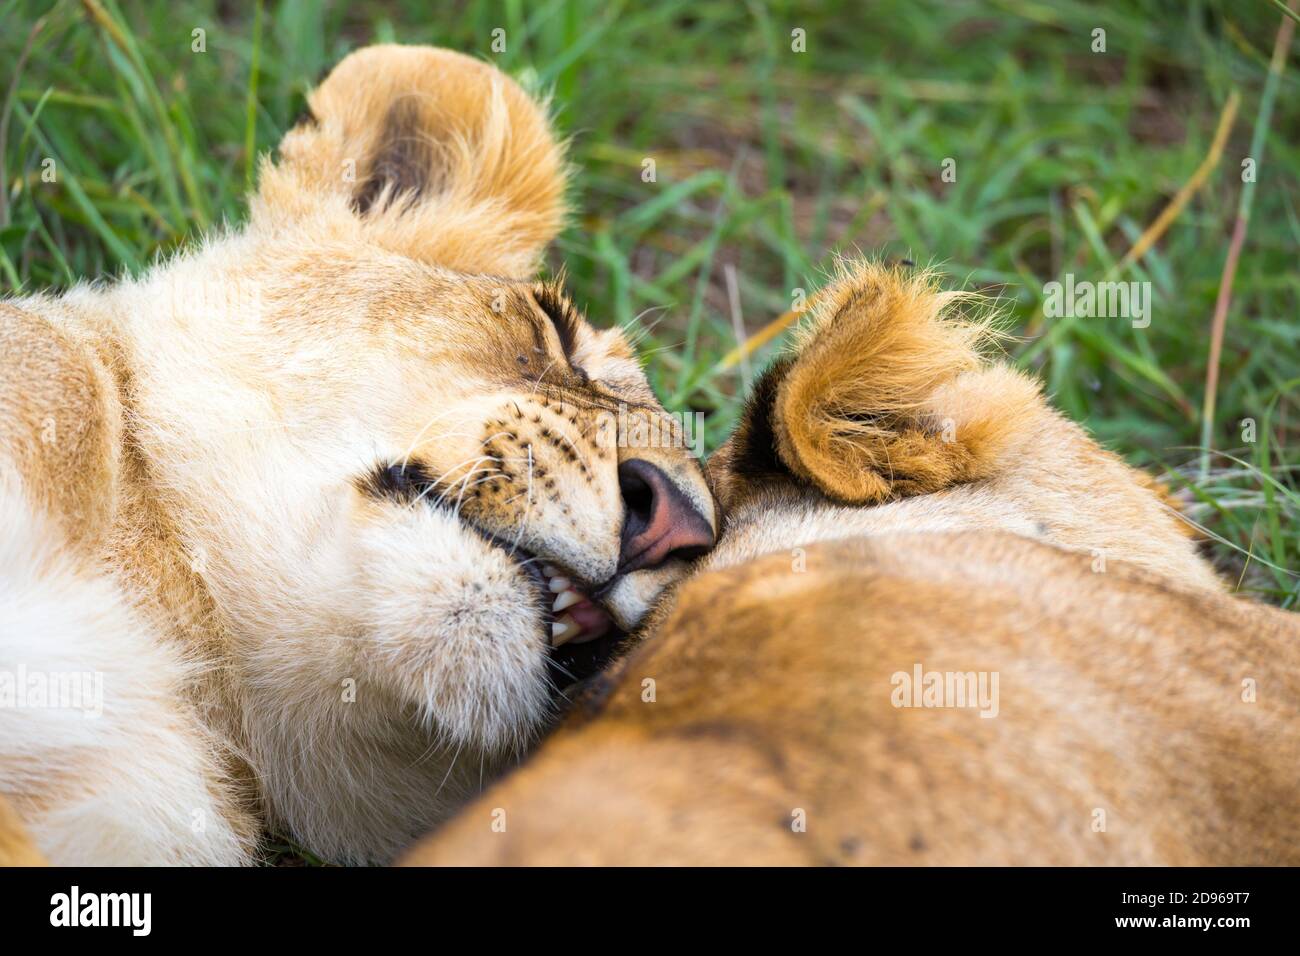 Some young lions cuddle and play with each other. Stock Photo